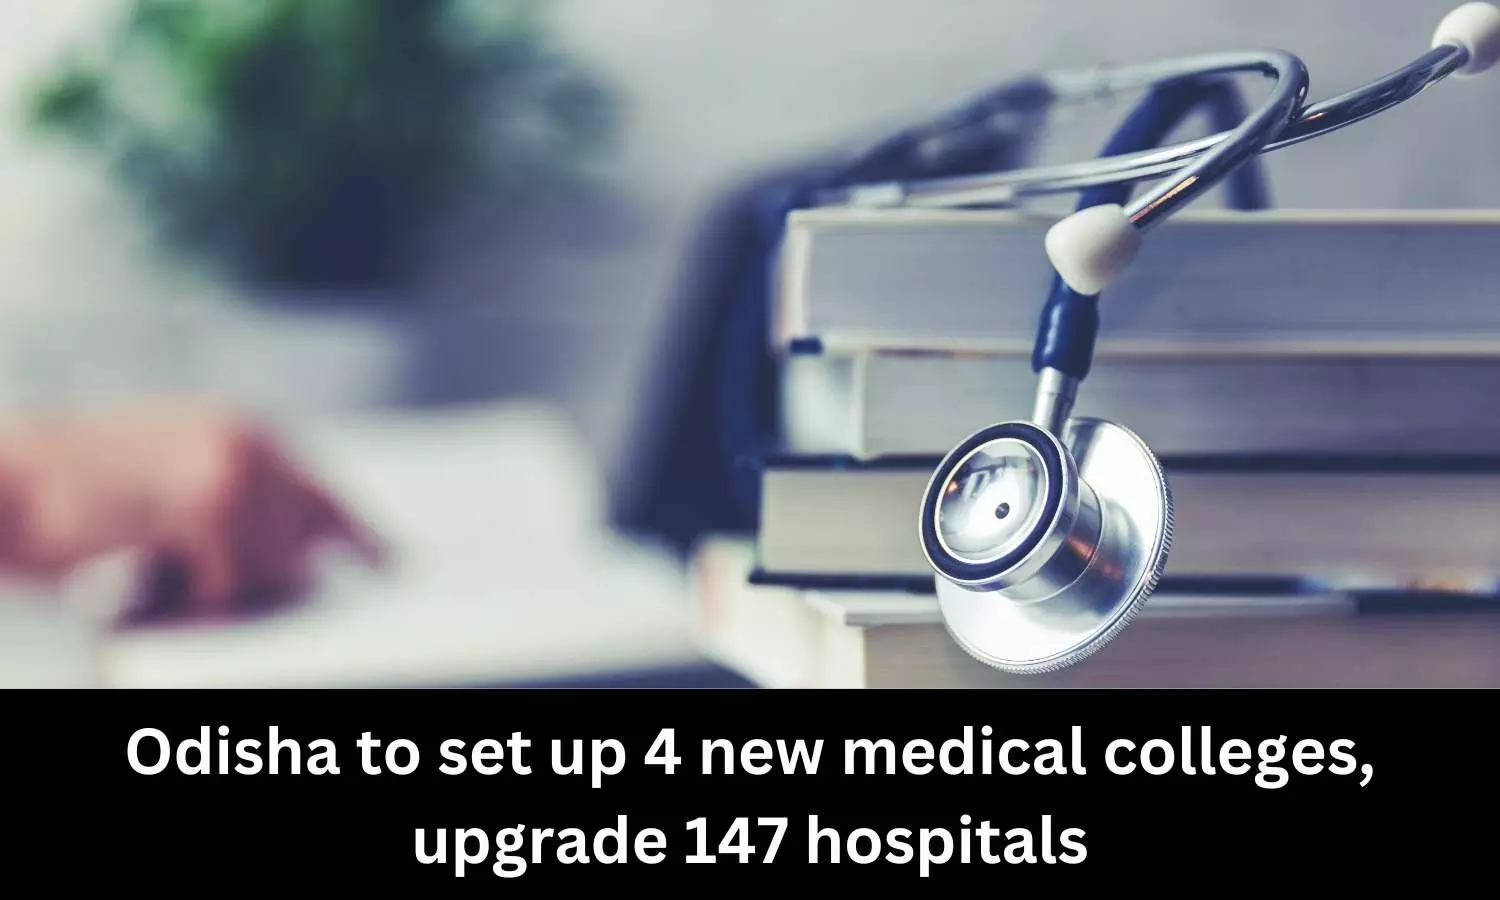 Odisha to get 4 new medical colleges